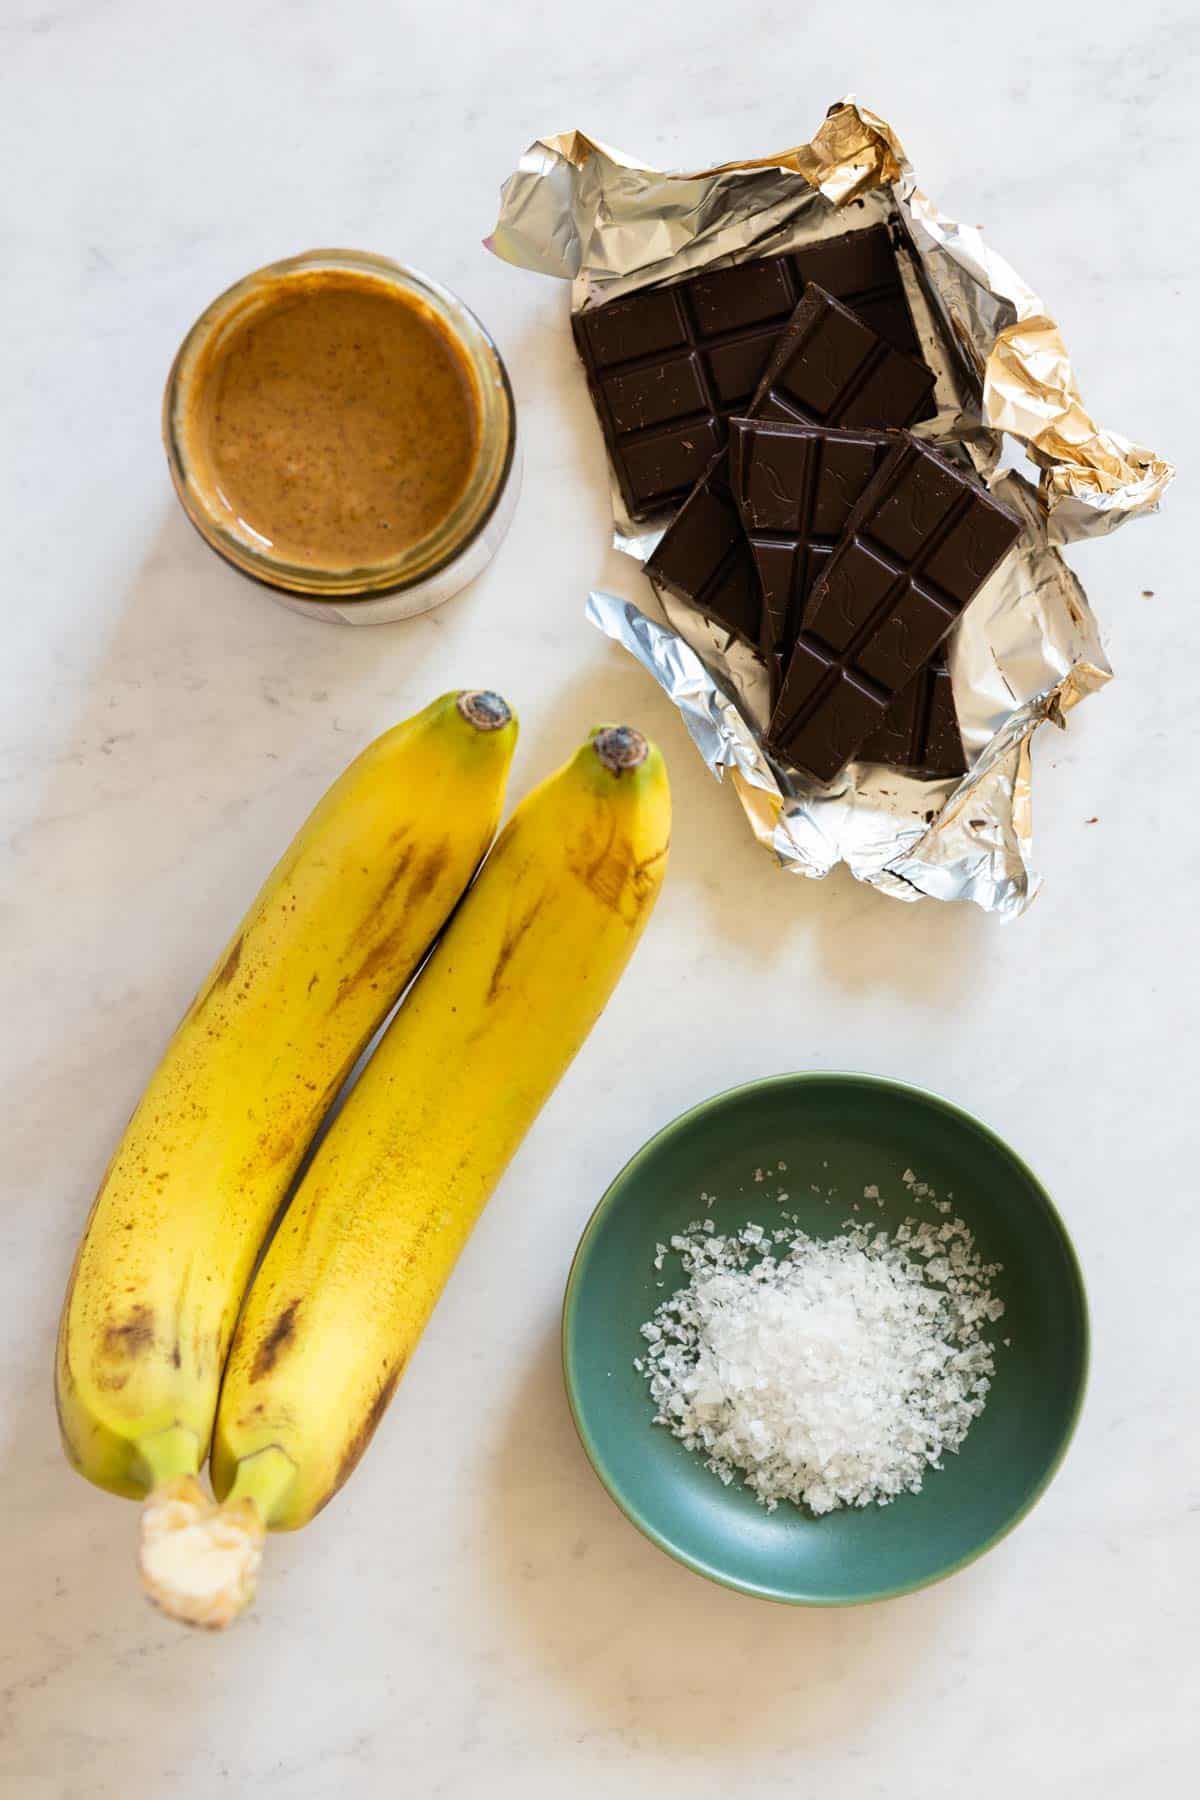 Two bananas, dark chocolate, hazelnut butter, and flaky sea salt laid out on a kitchen counter.